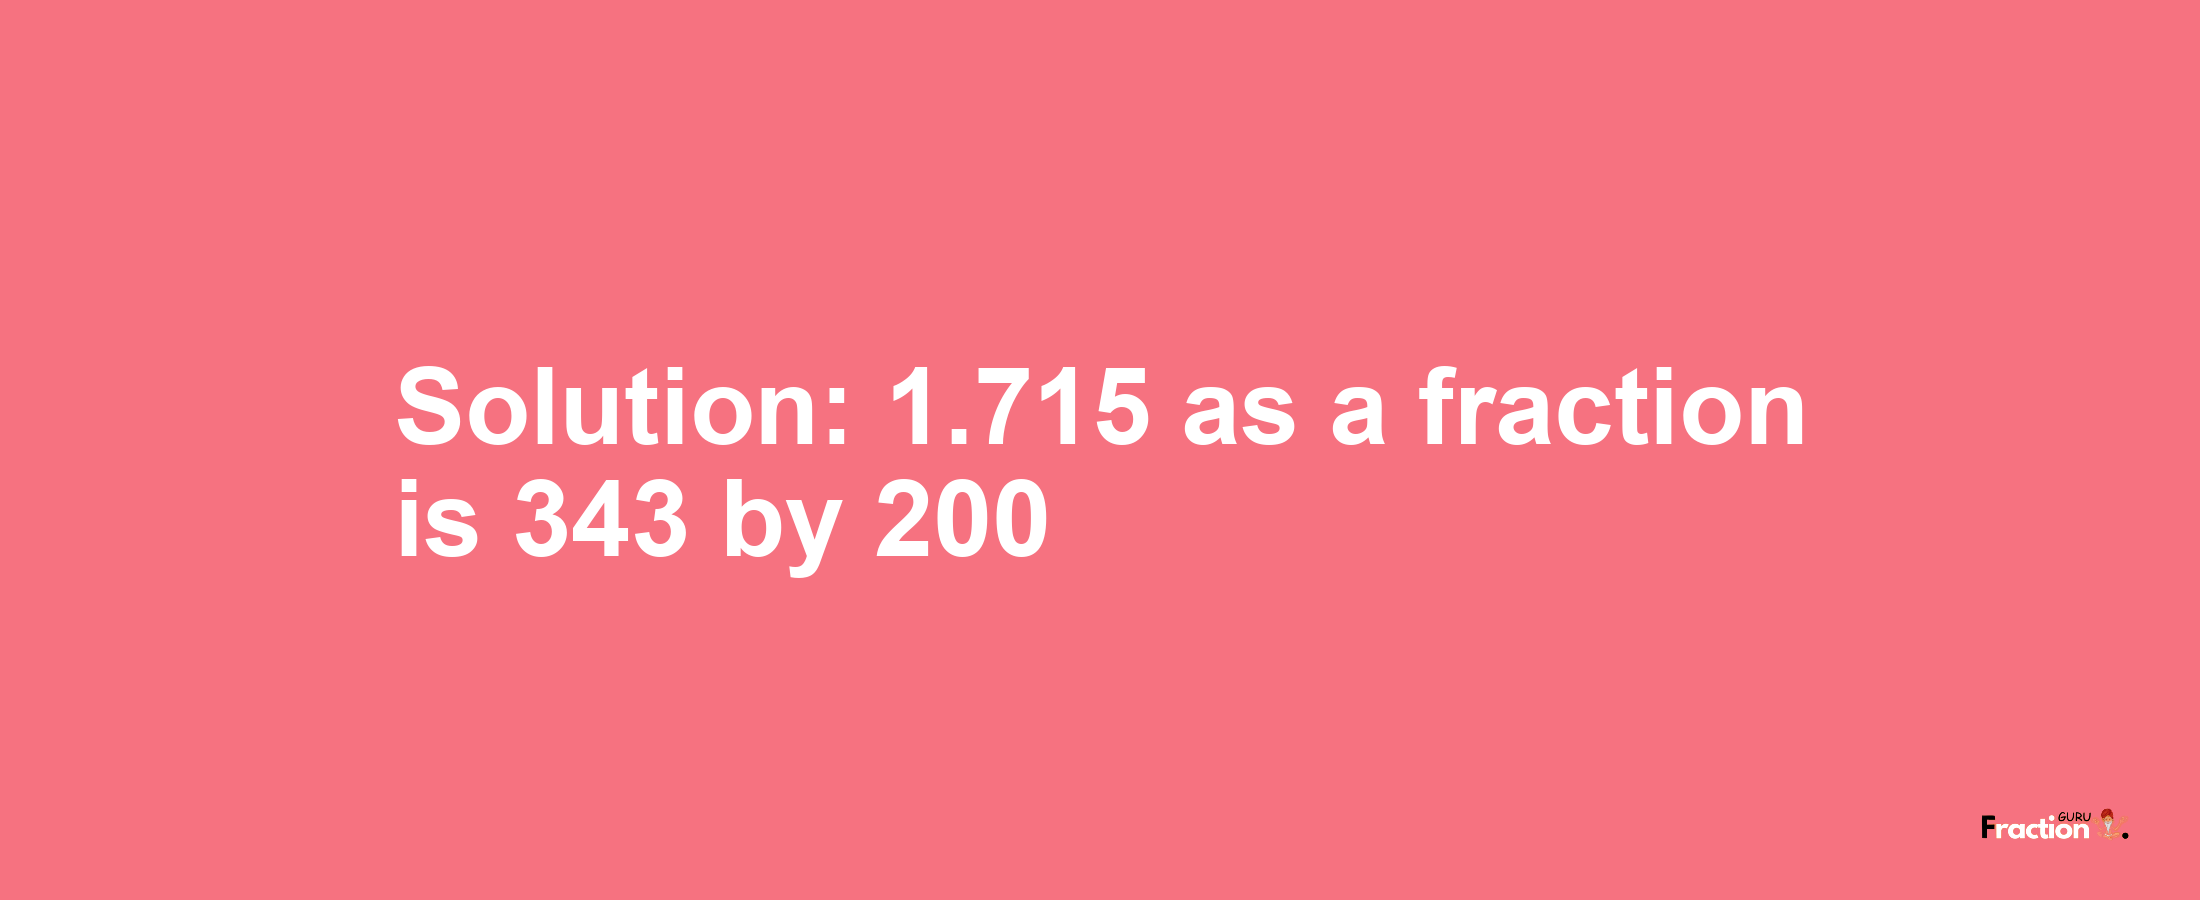 Solution:1.715 as a fraction is 343/200